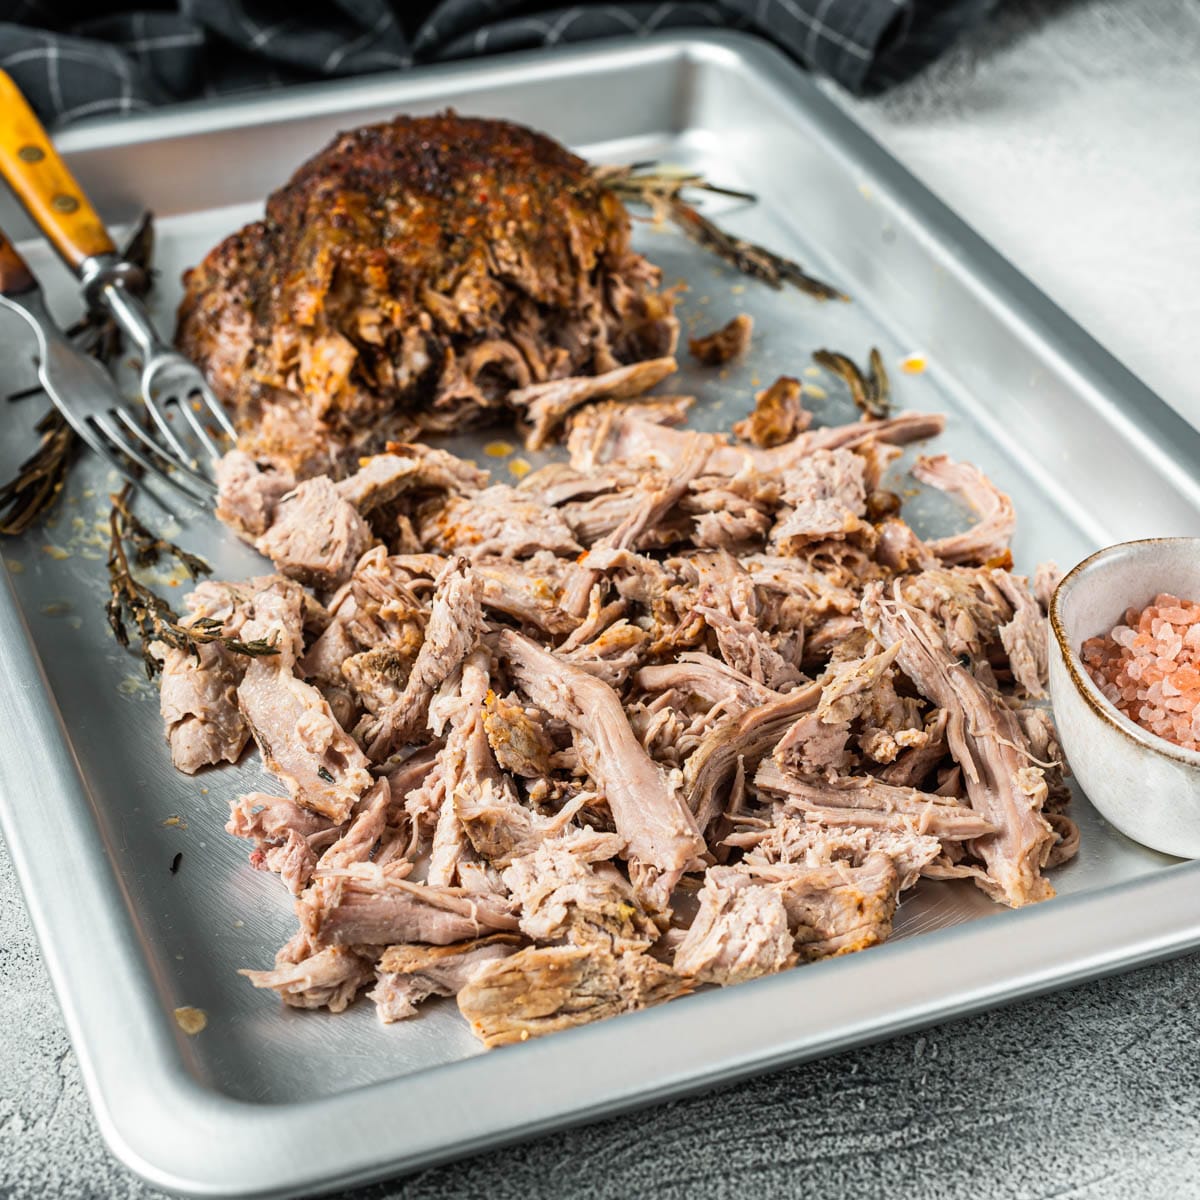 Sheet pan with pulled pork, two forks and a small bowl of salt on the pan.